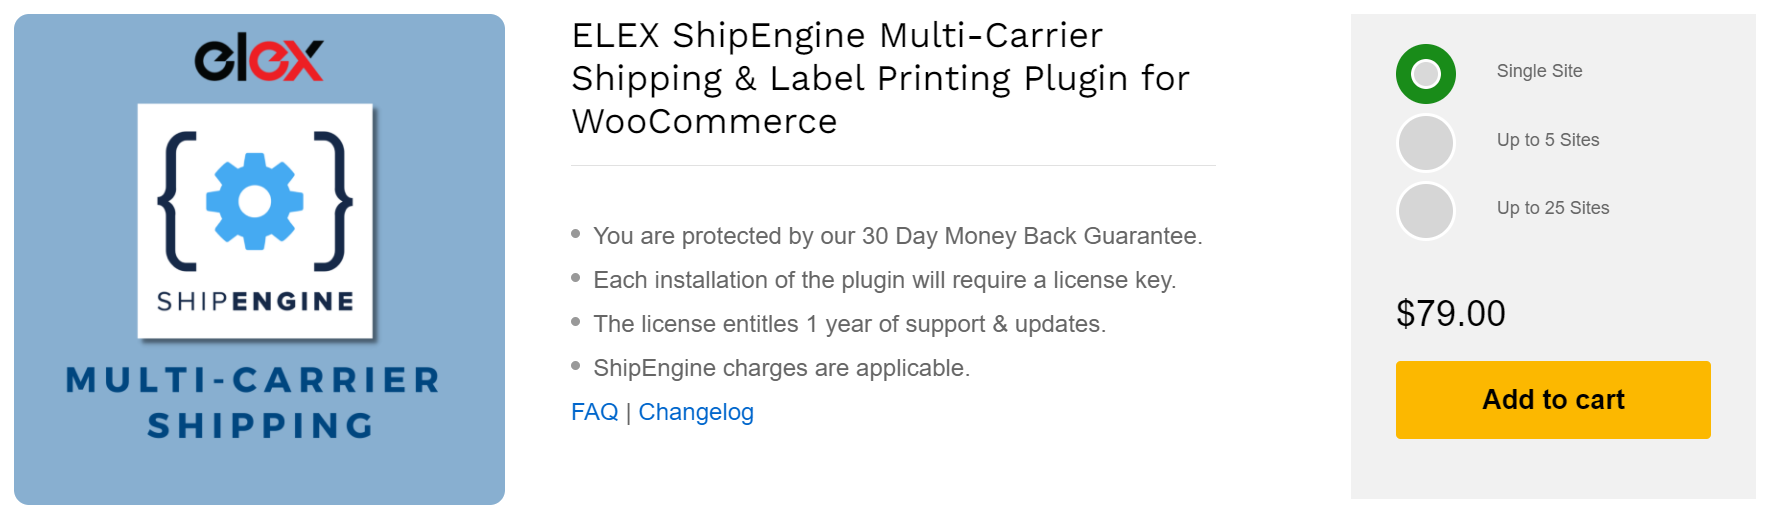 How is the ELEX ShipEngine plugin going to improve the shipping process of your WooCommerce Store?